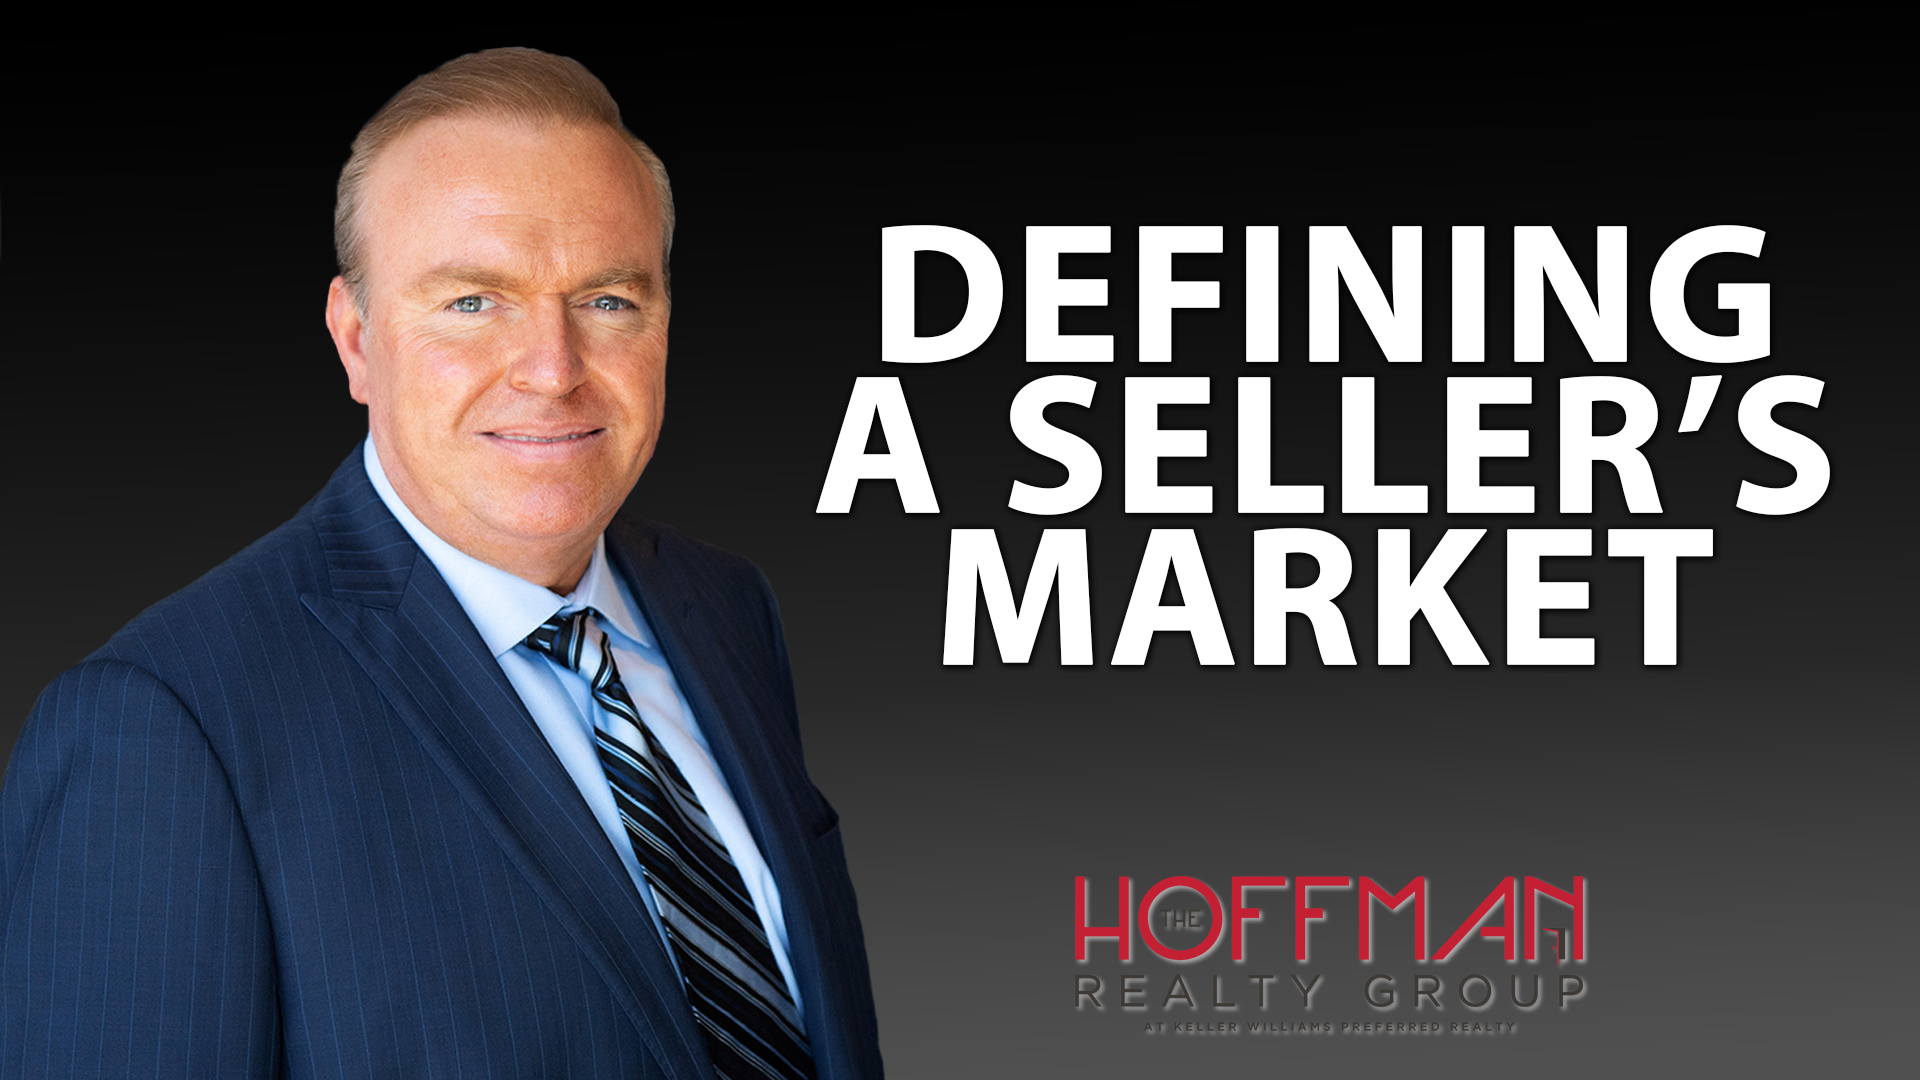 What Makes It A Seller’s Market?